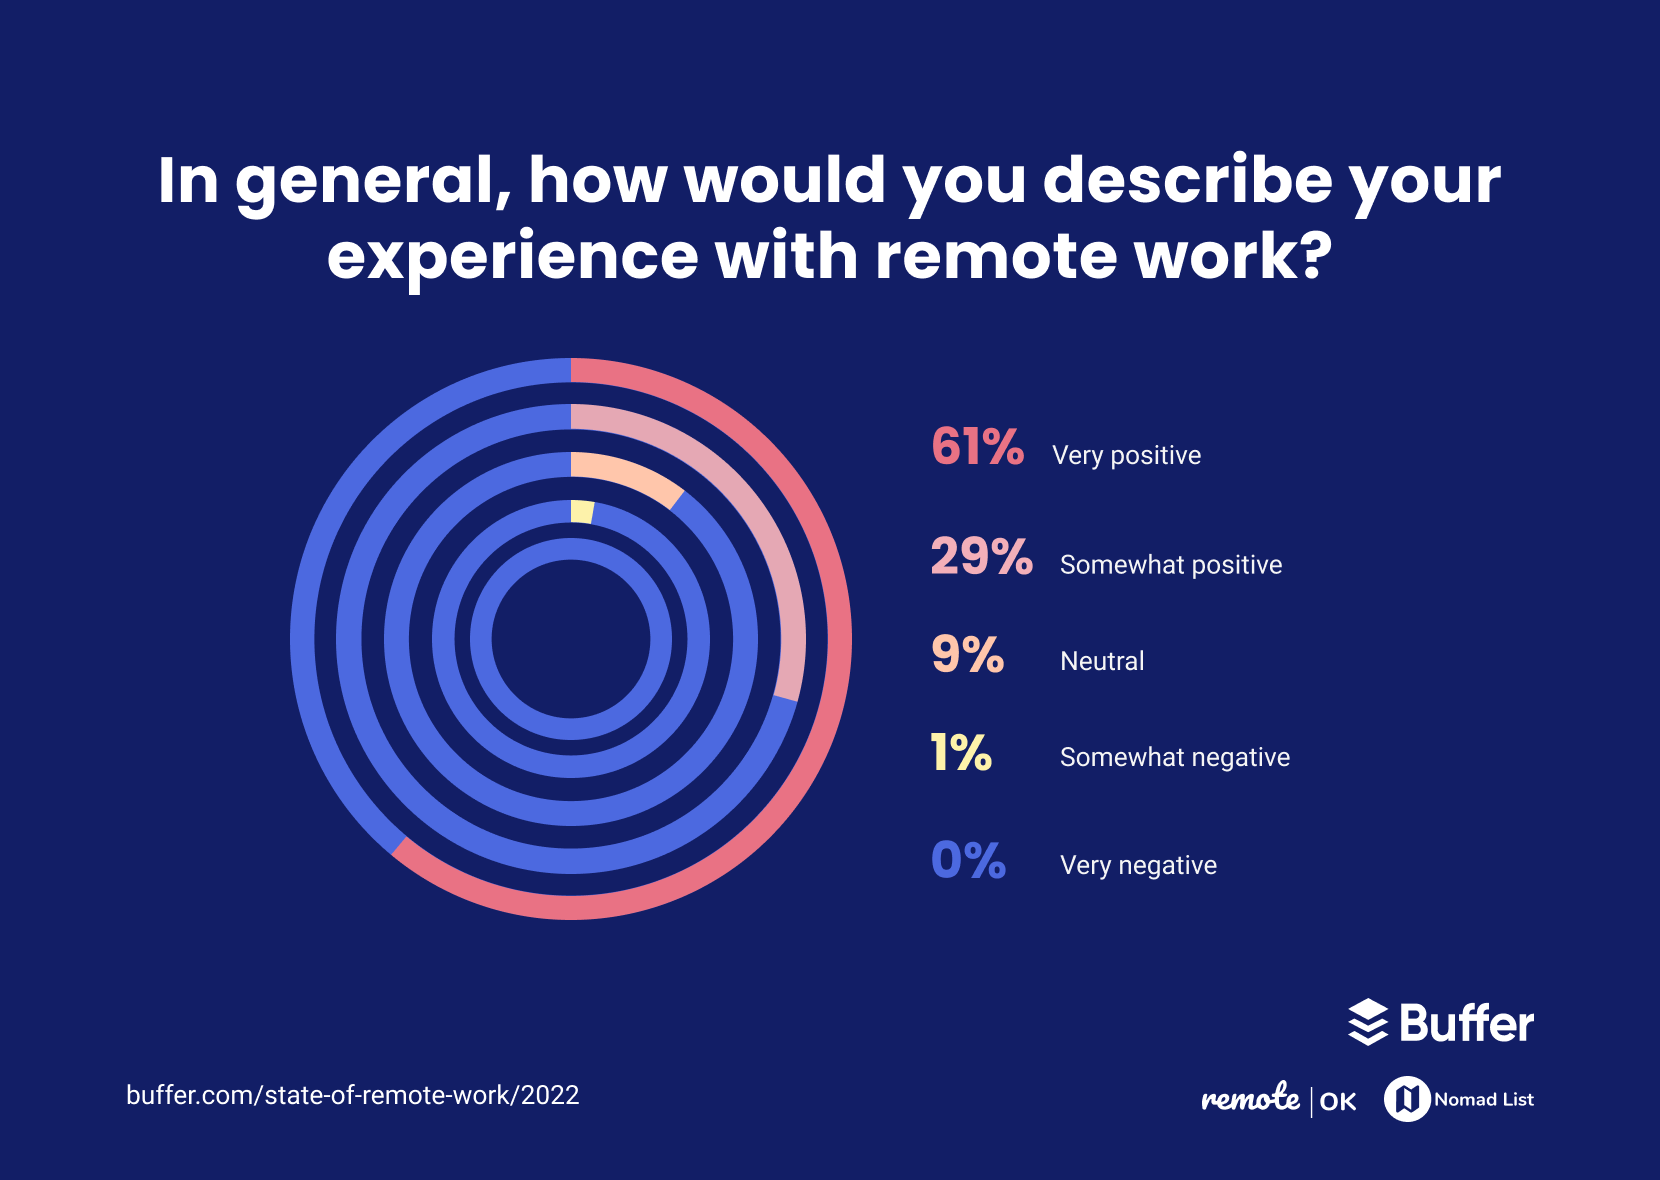 In general, how would you describe your experience with remote work?